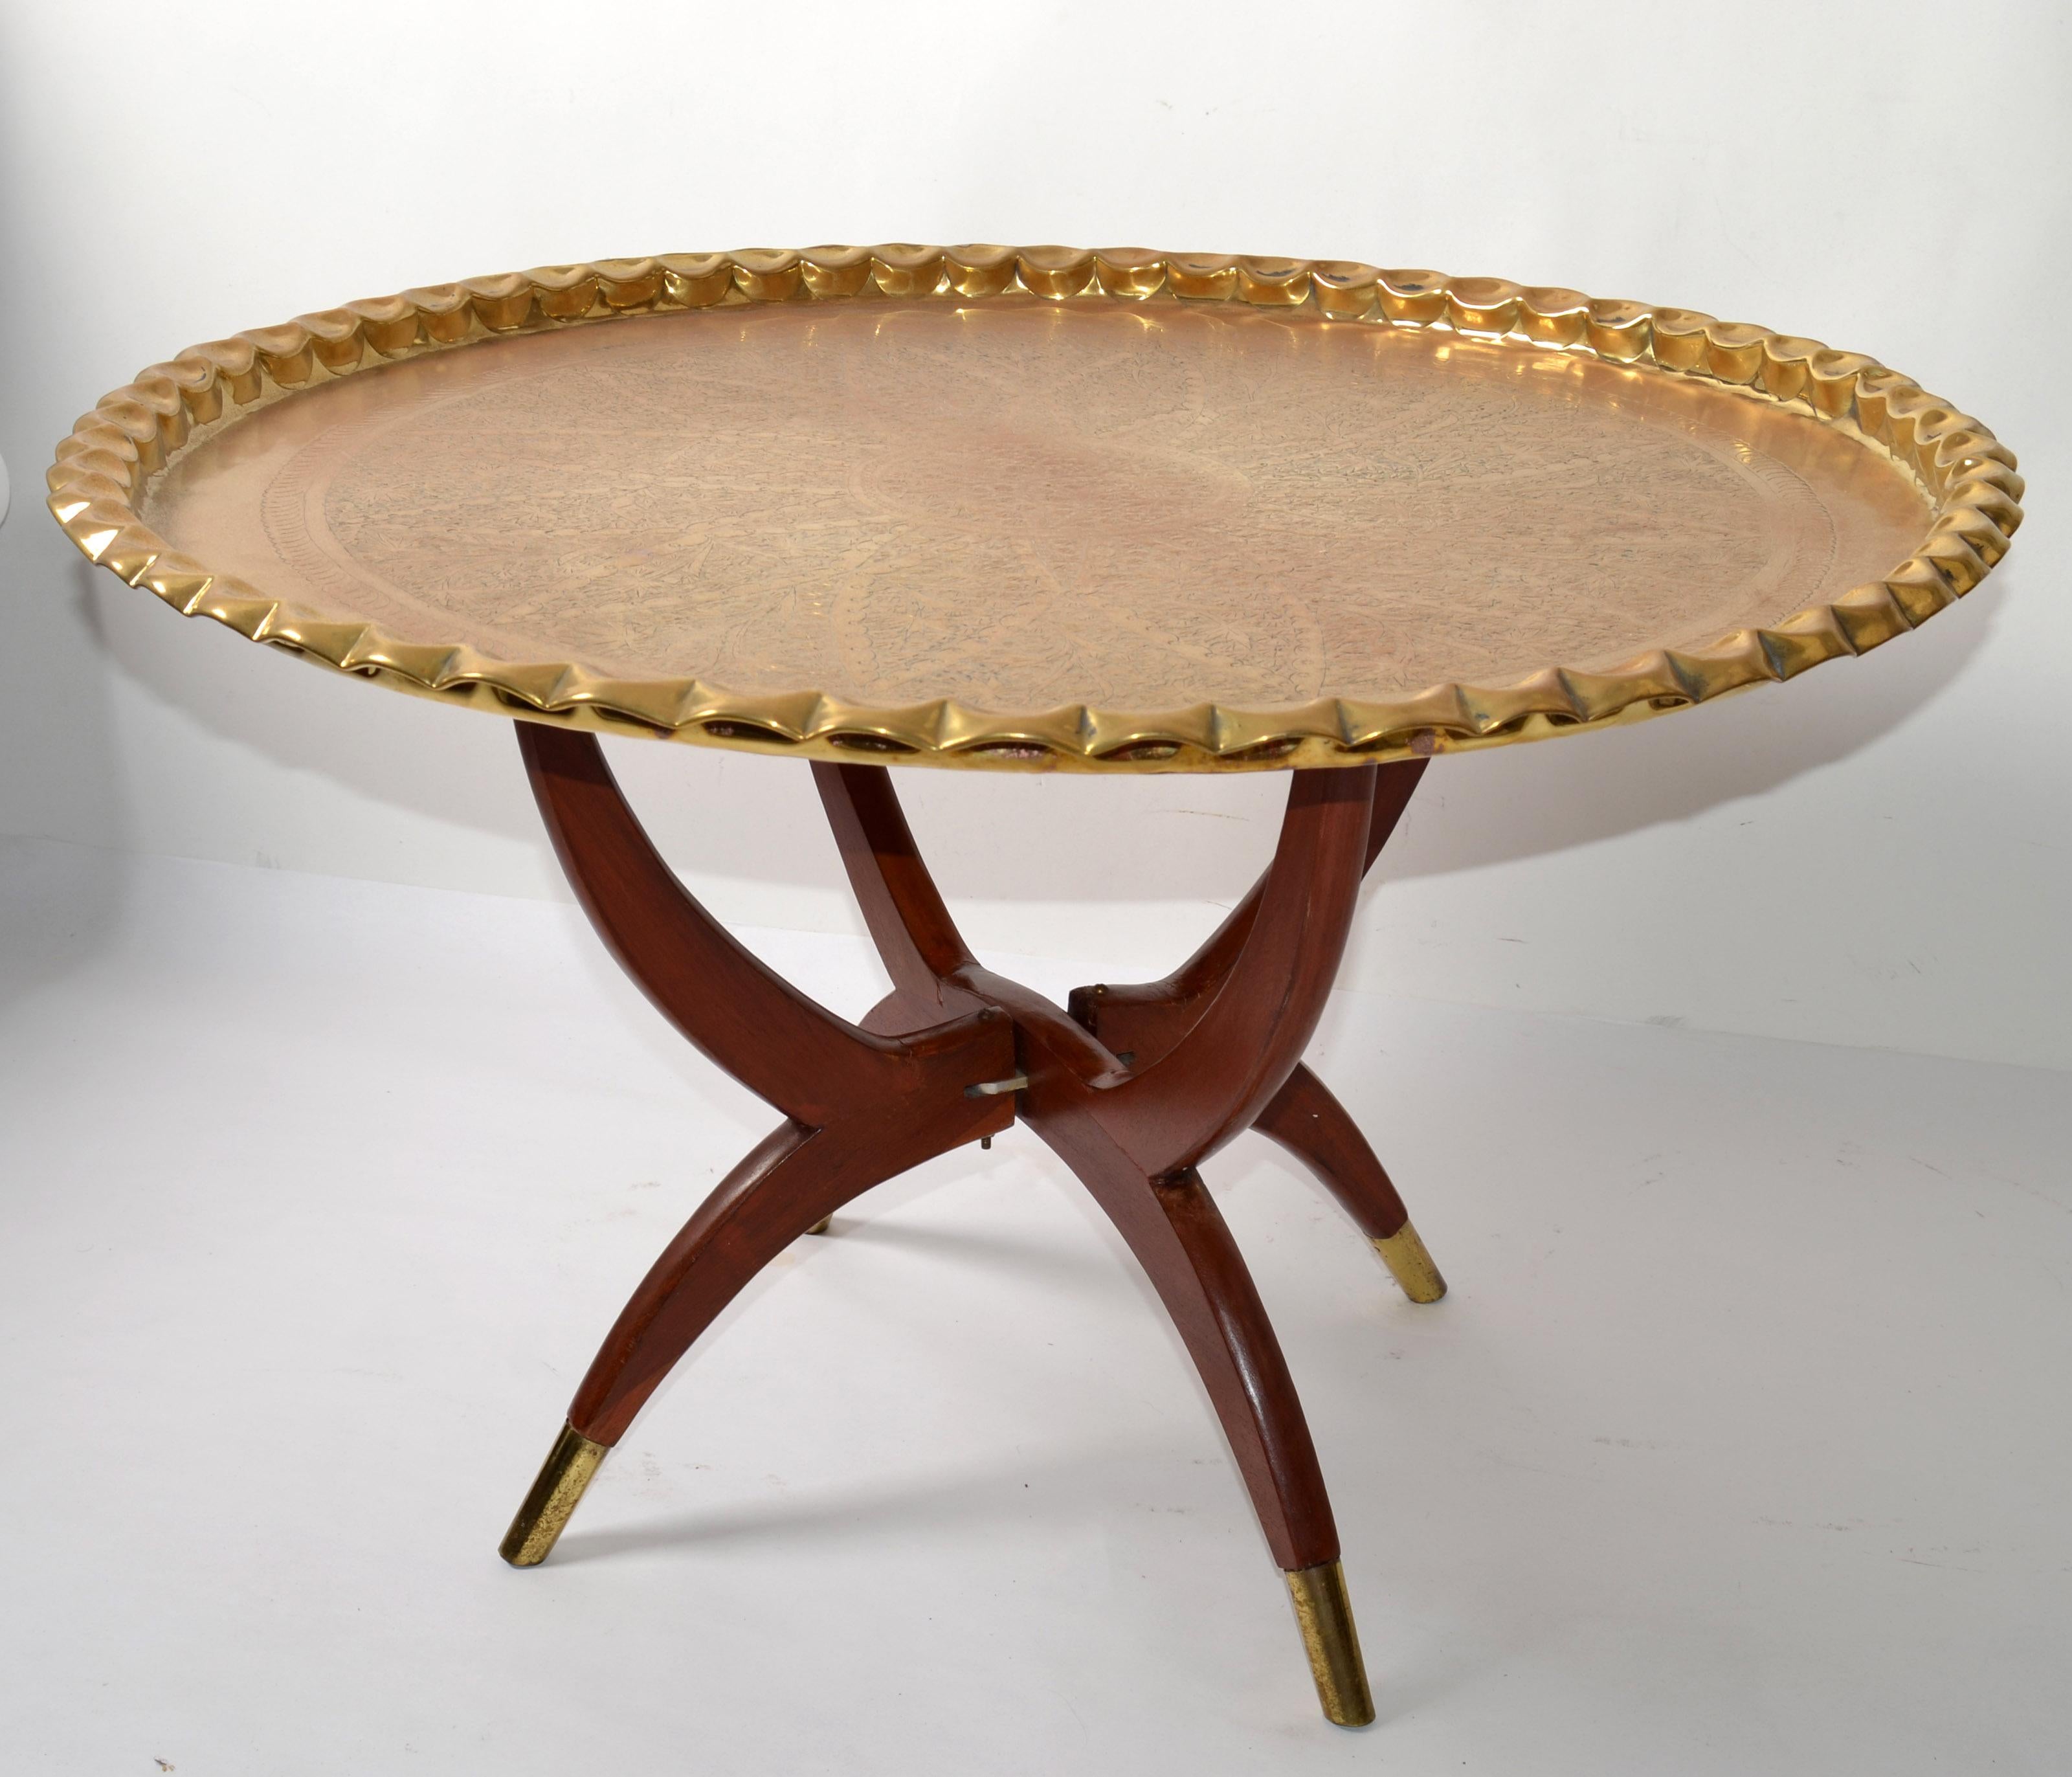 Islamic Oriental Vintage Round Walnut Spider Leg and Bronze Moroccan Tray Coffee Table For Sale